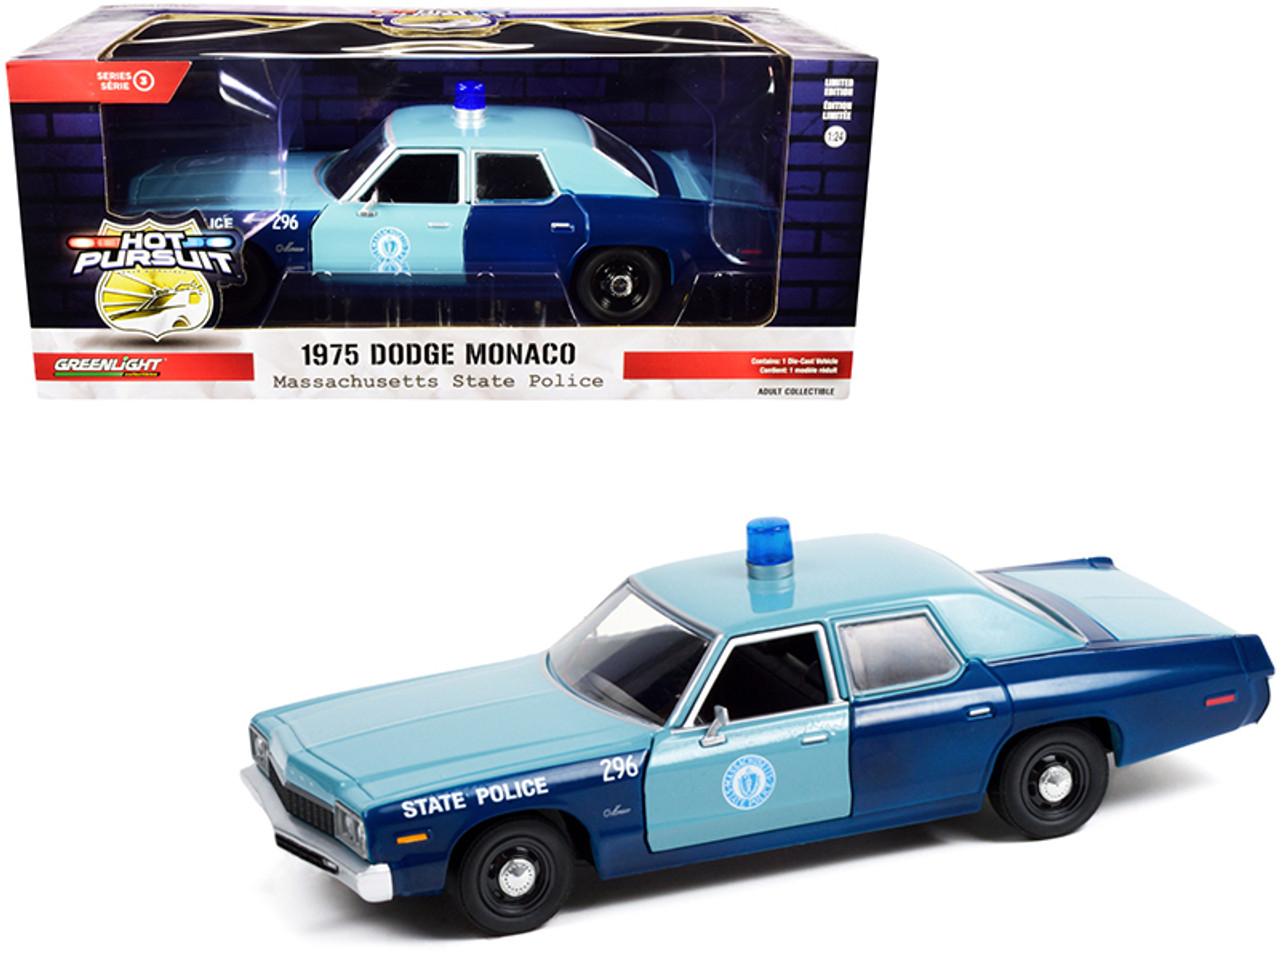 1975 Dodge Monaco Light Blue and Dark Blue "Massachusetts State Police" "Hot Pursuit" Series 1/24 Diecast Model Car by Greenlight